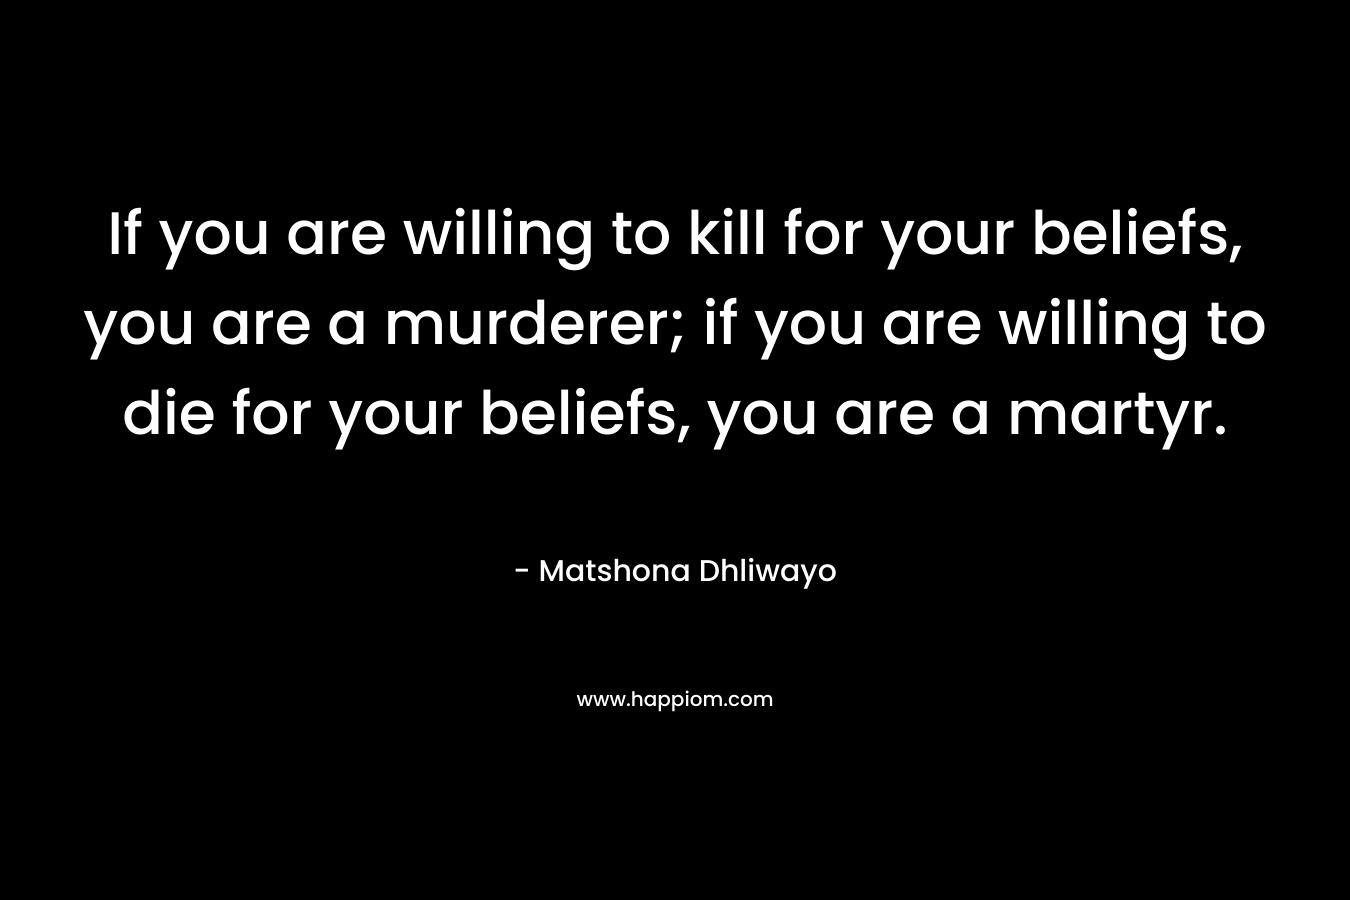 If you are willing to kill for your beliefs, you are a murderer; if you are willing to die for your beliefs, you are a martyr.